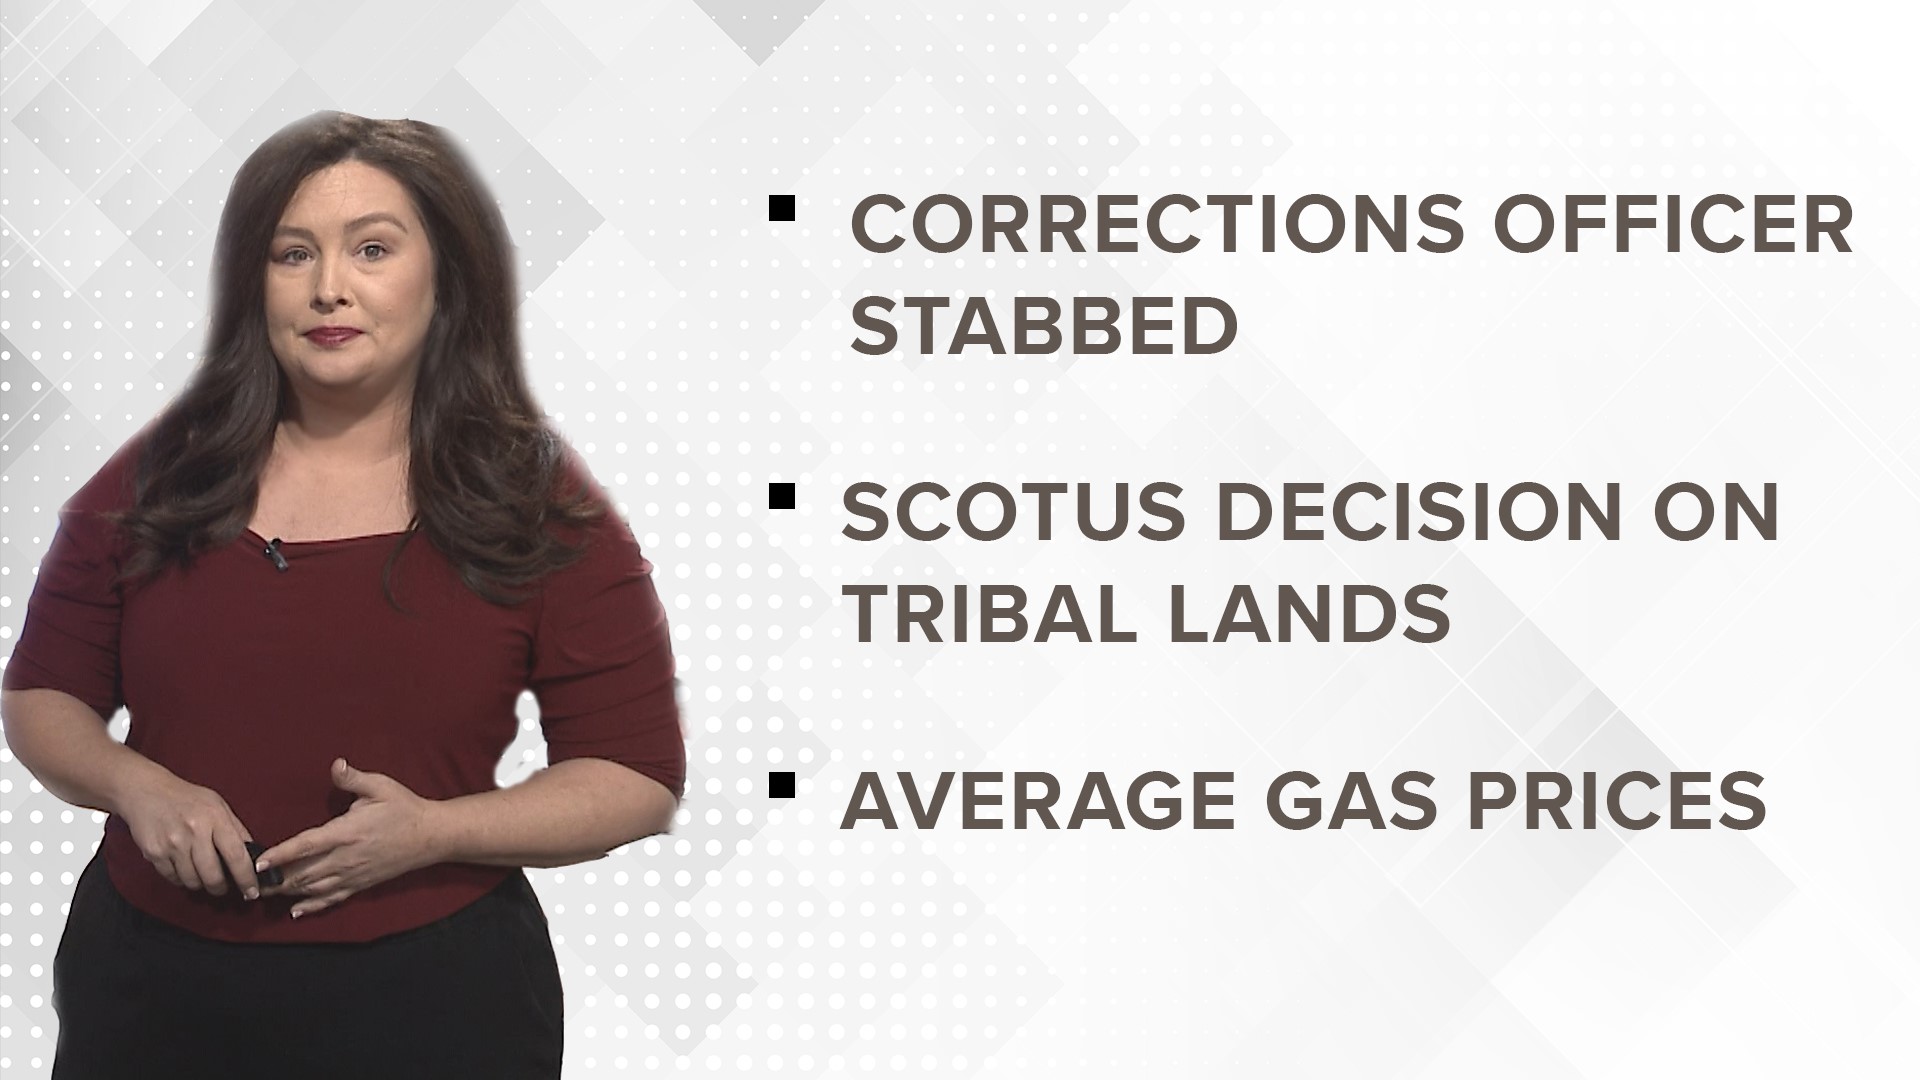 Daily headlines for June 29, 2022:
• Corrections officer stabbed in Fayetteville
• SCOTUS decision on states prosecuting on tribal lands
• Average gas prices